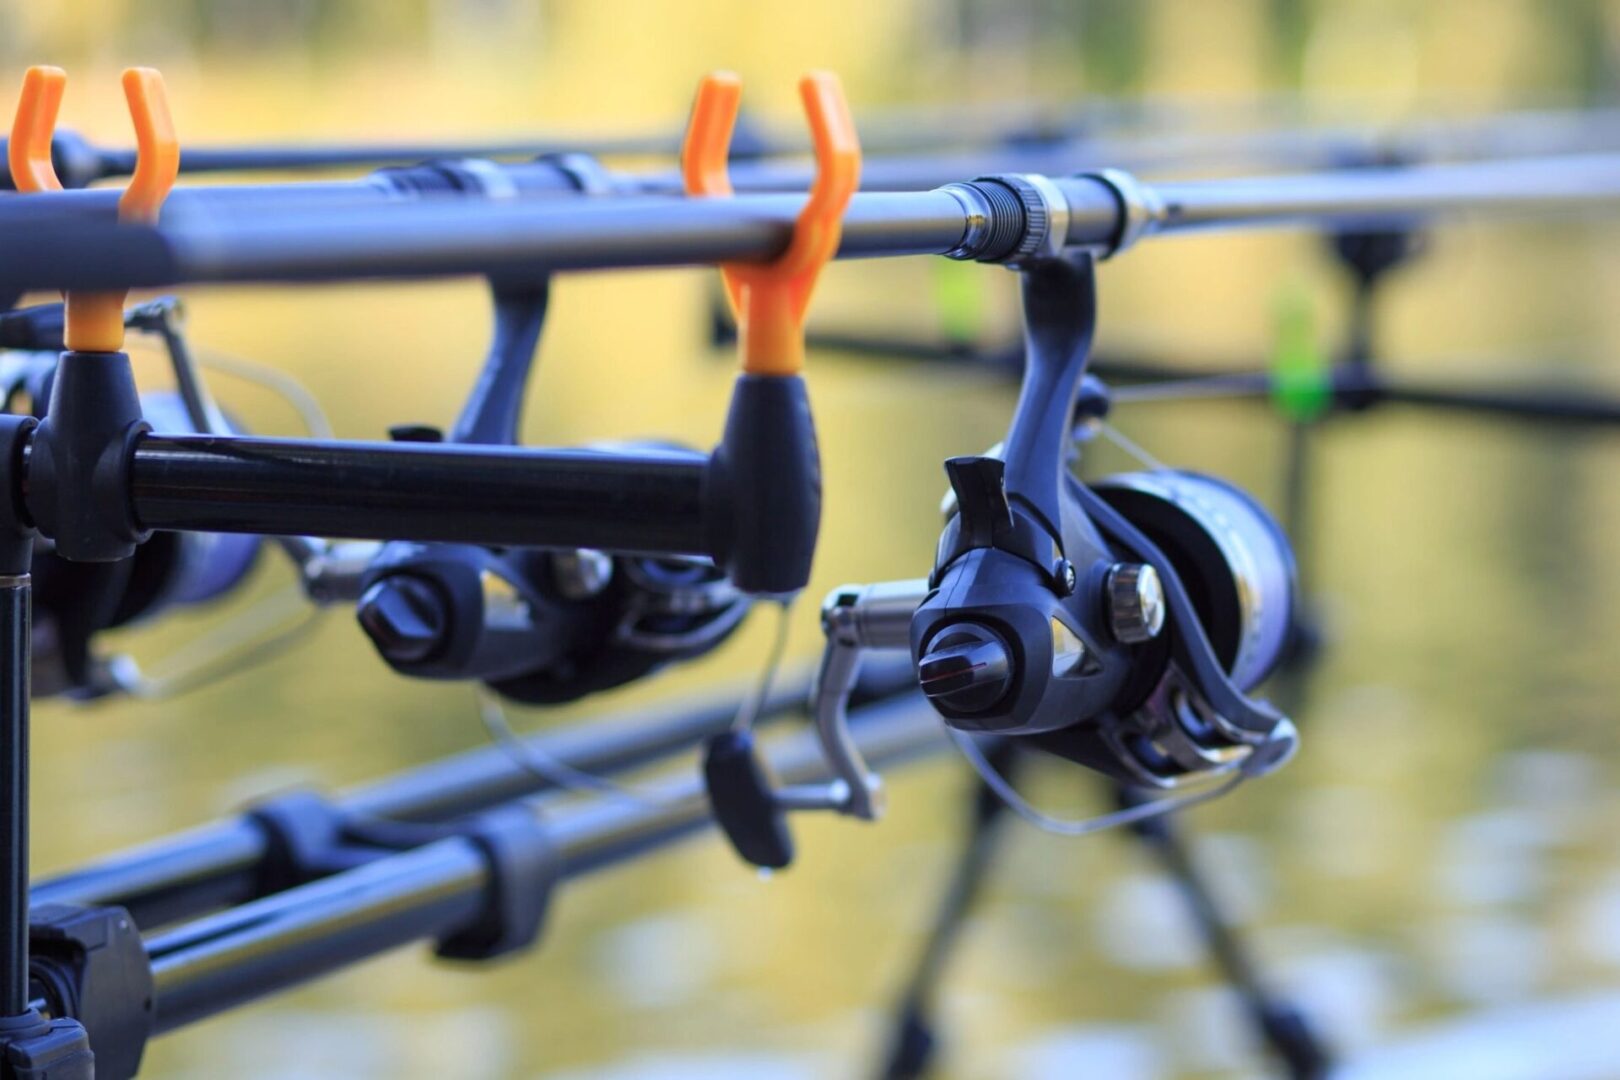 A close up of fishing rods with reels attached